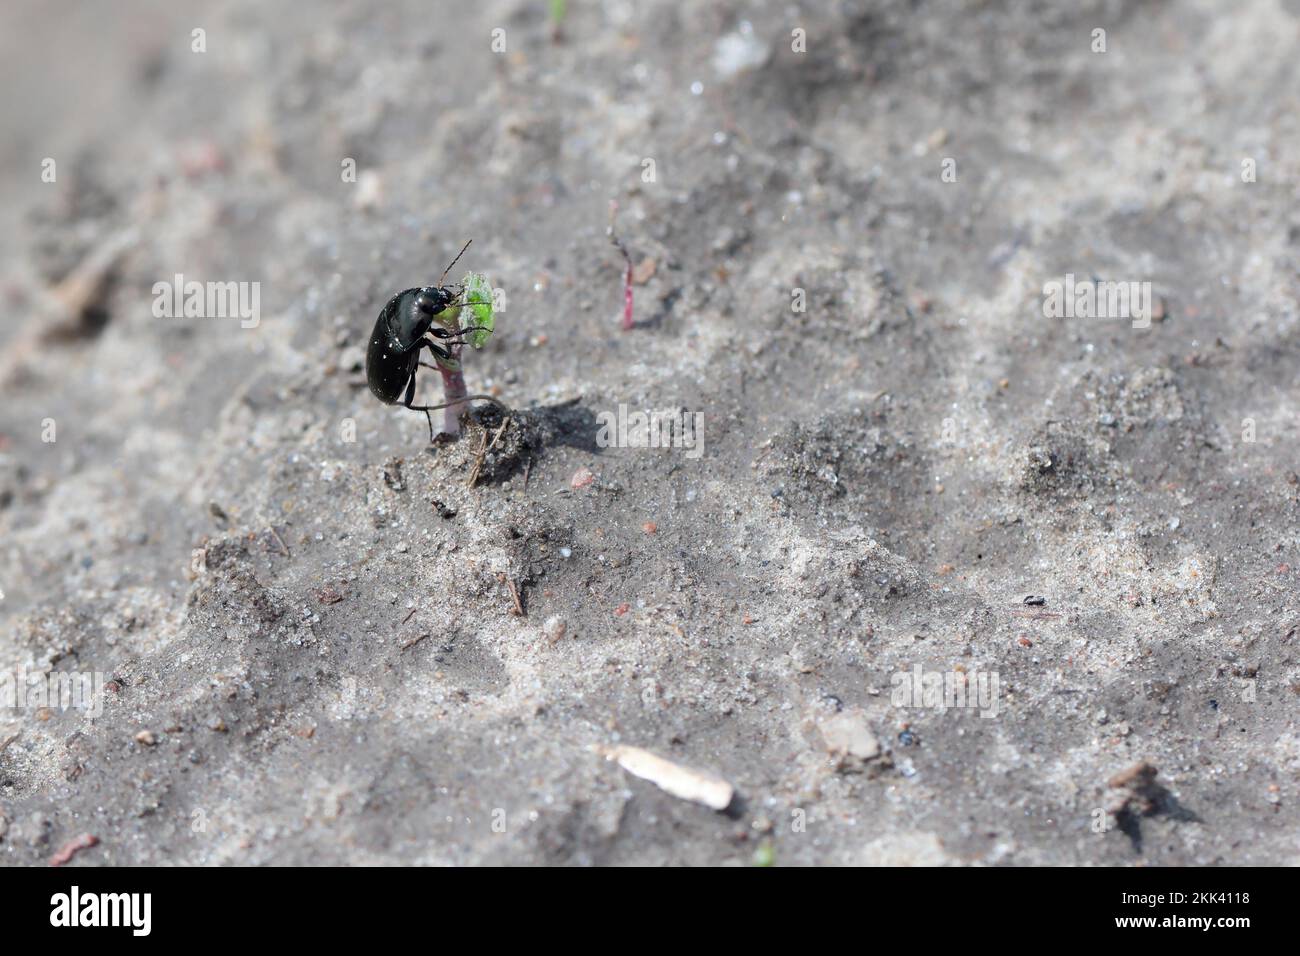 A beetle of the genus Amara (Carabid, ground beetle) eating a young plant in a crop field. Crop parasite. Stock Photo